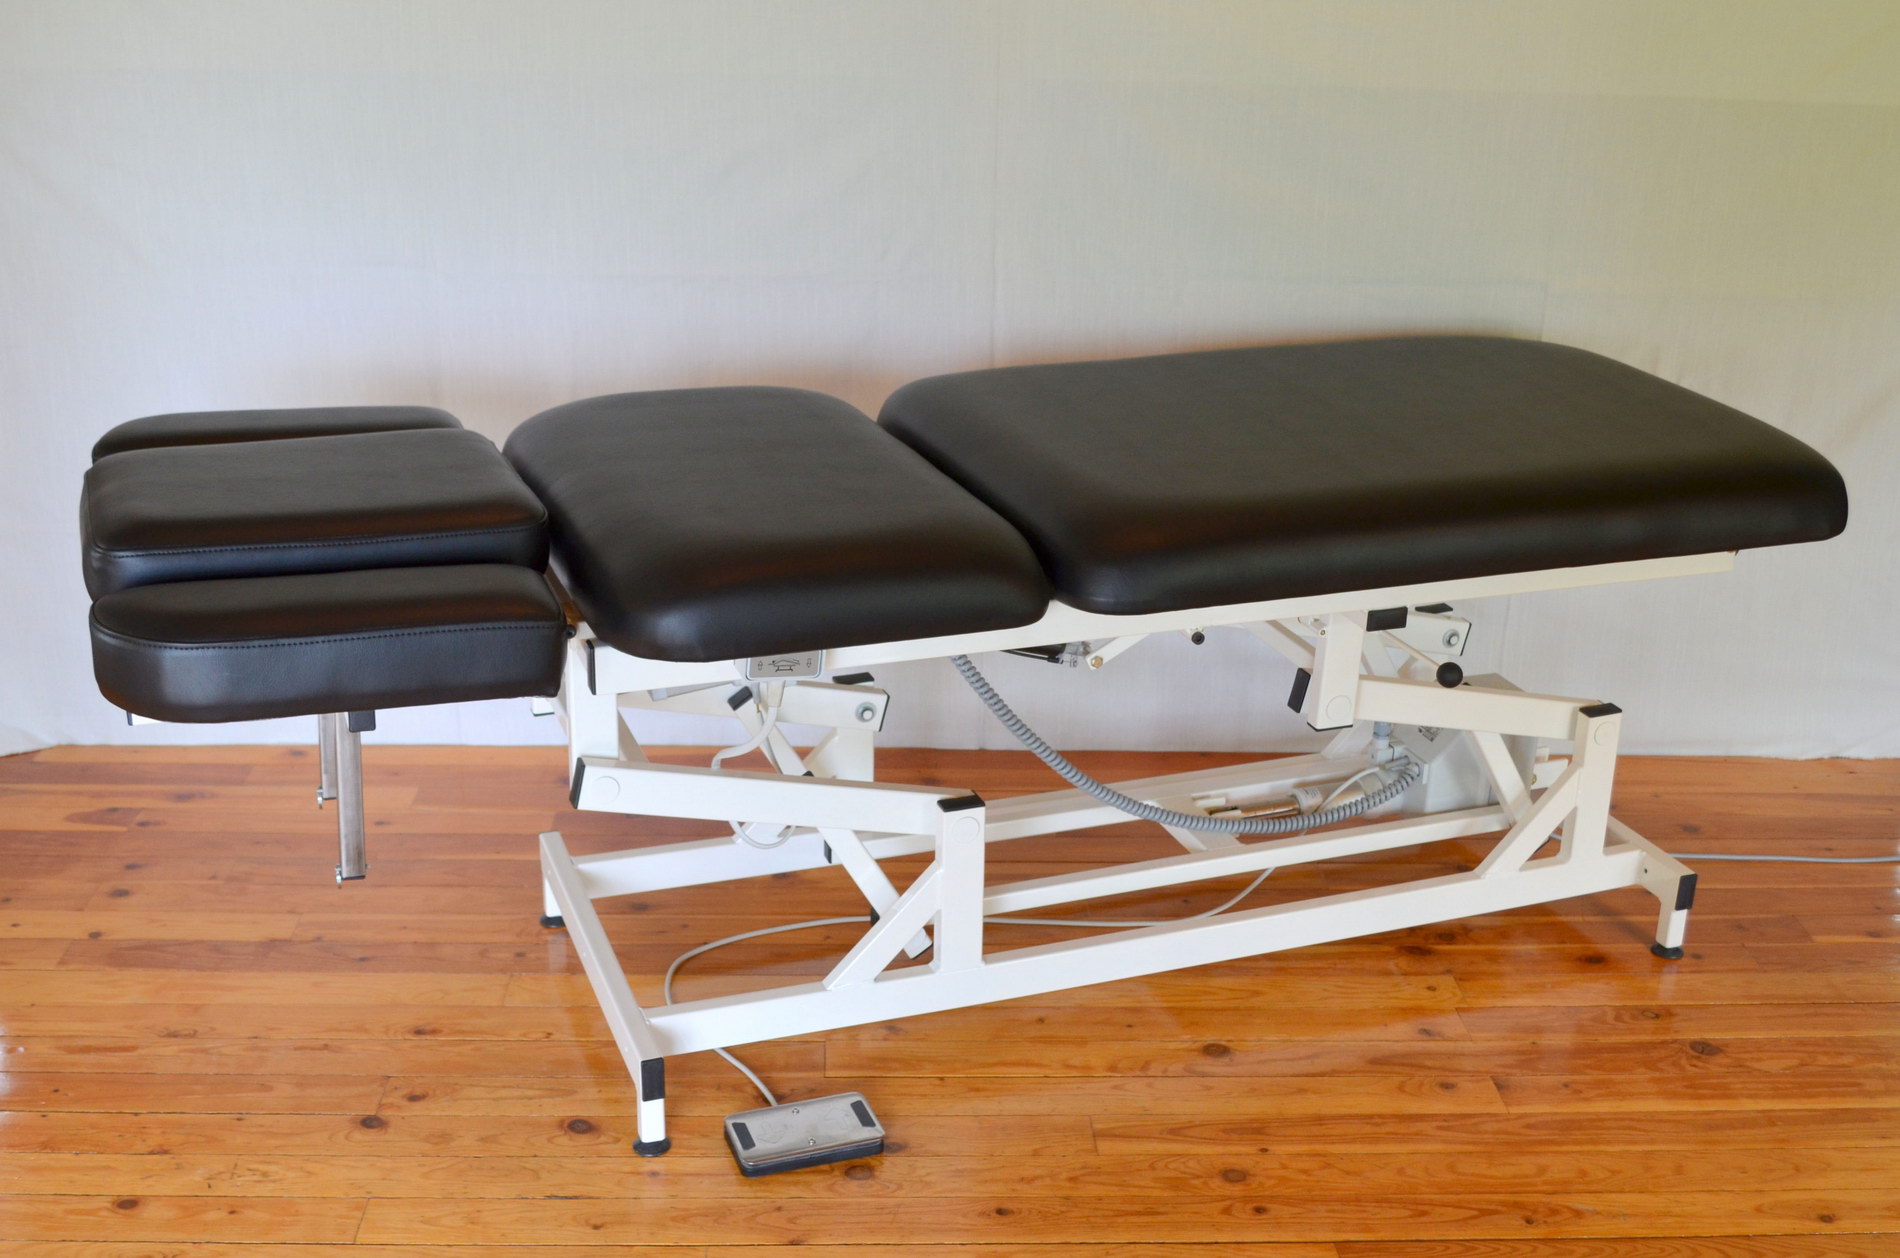 Reha-med manual therapy table